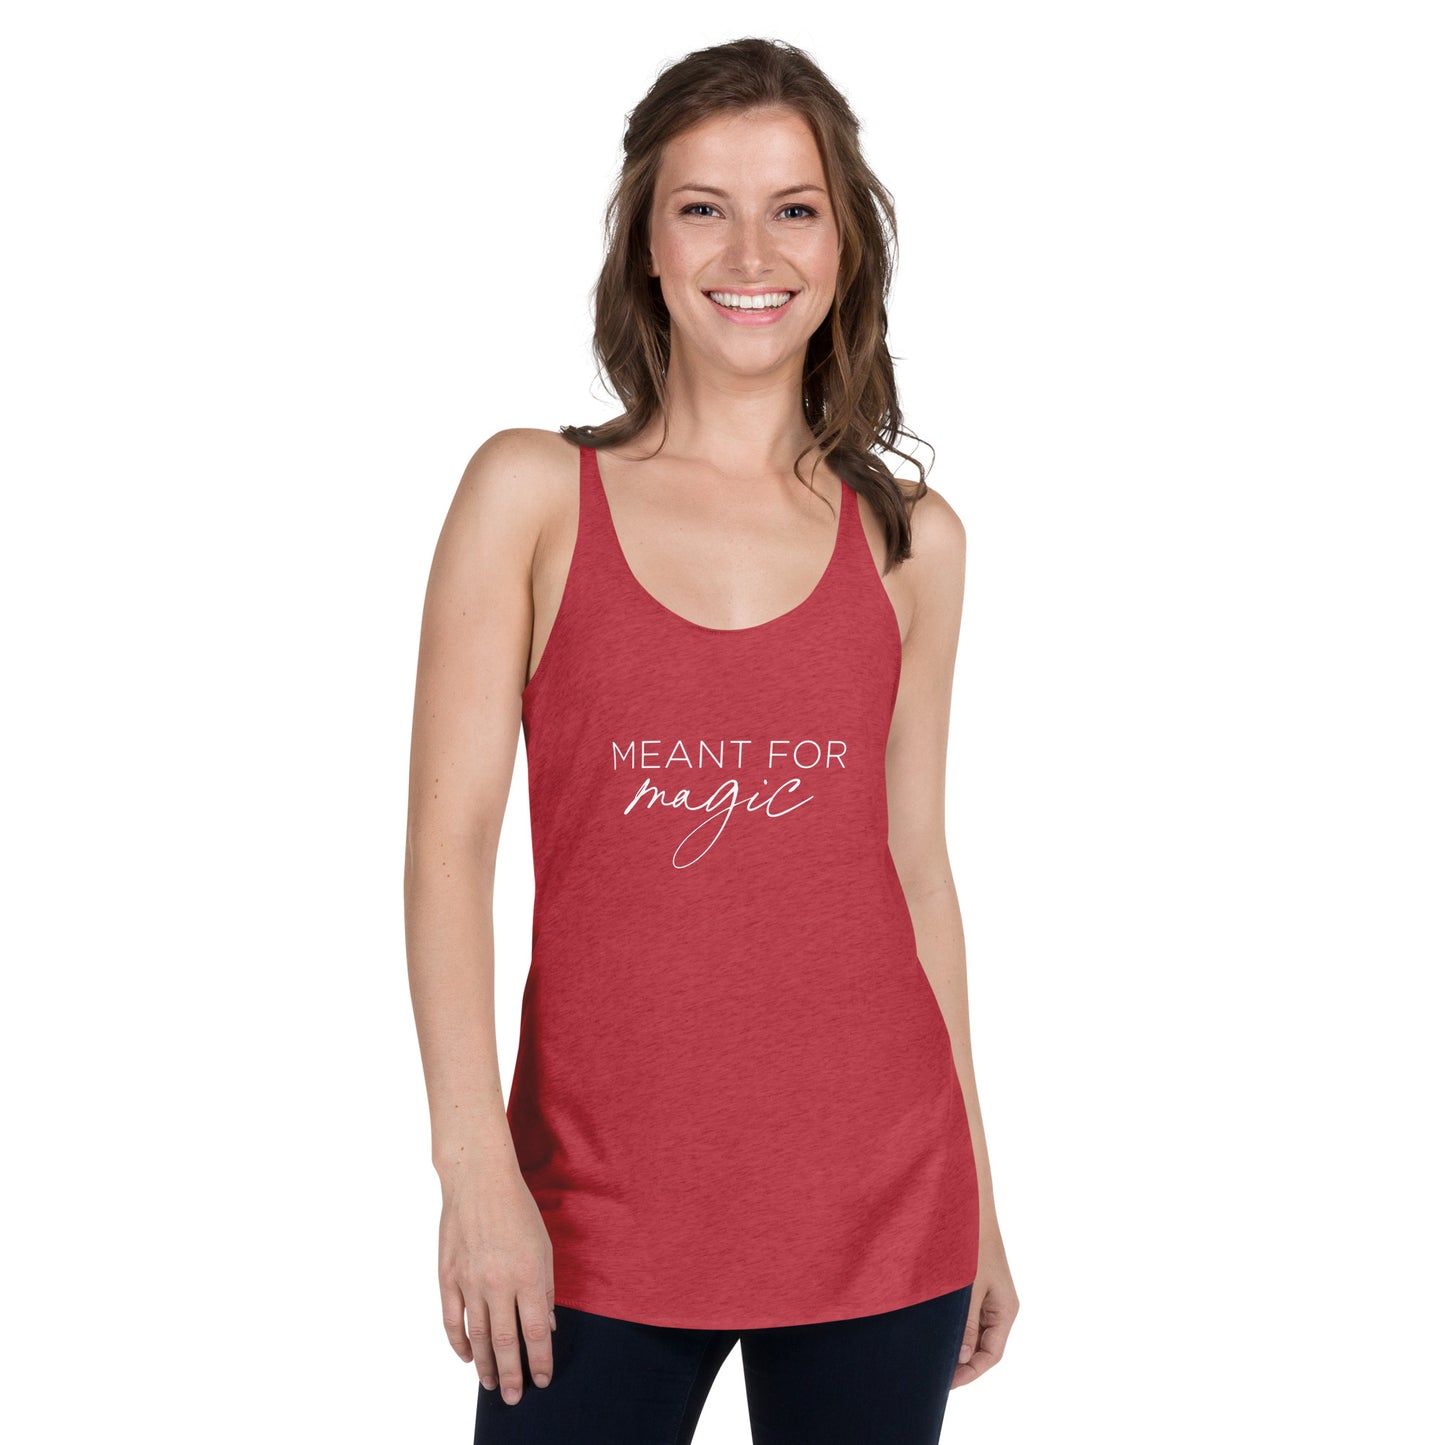 The Meant for Magic Women's Racerback Tank